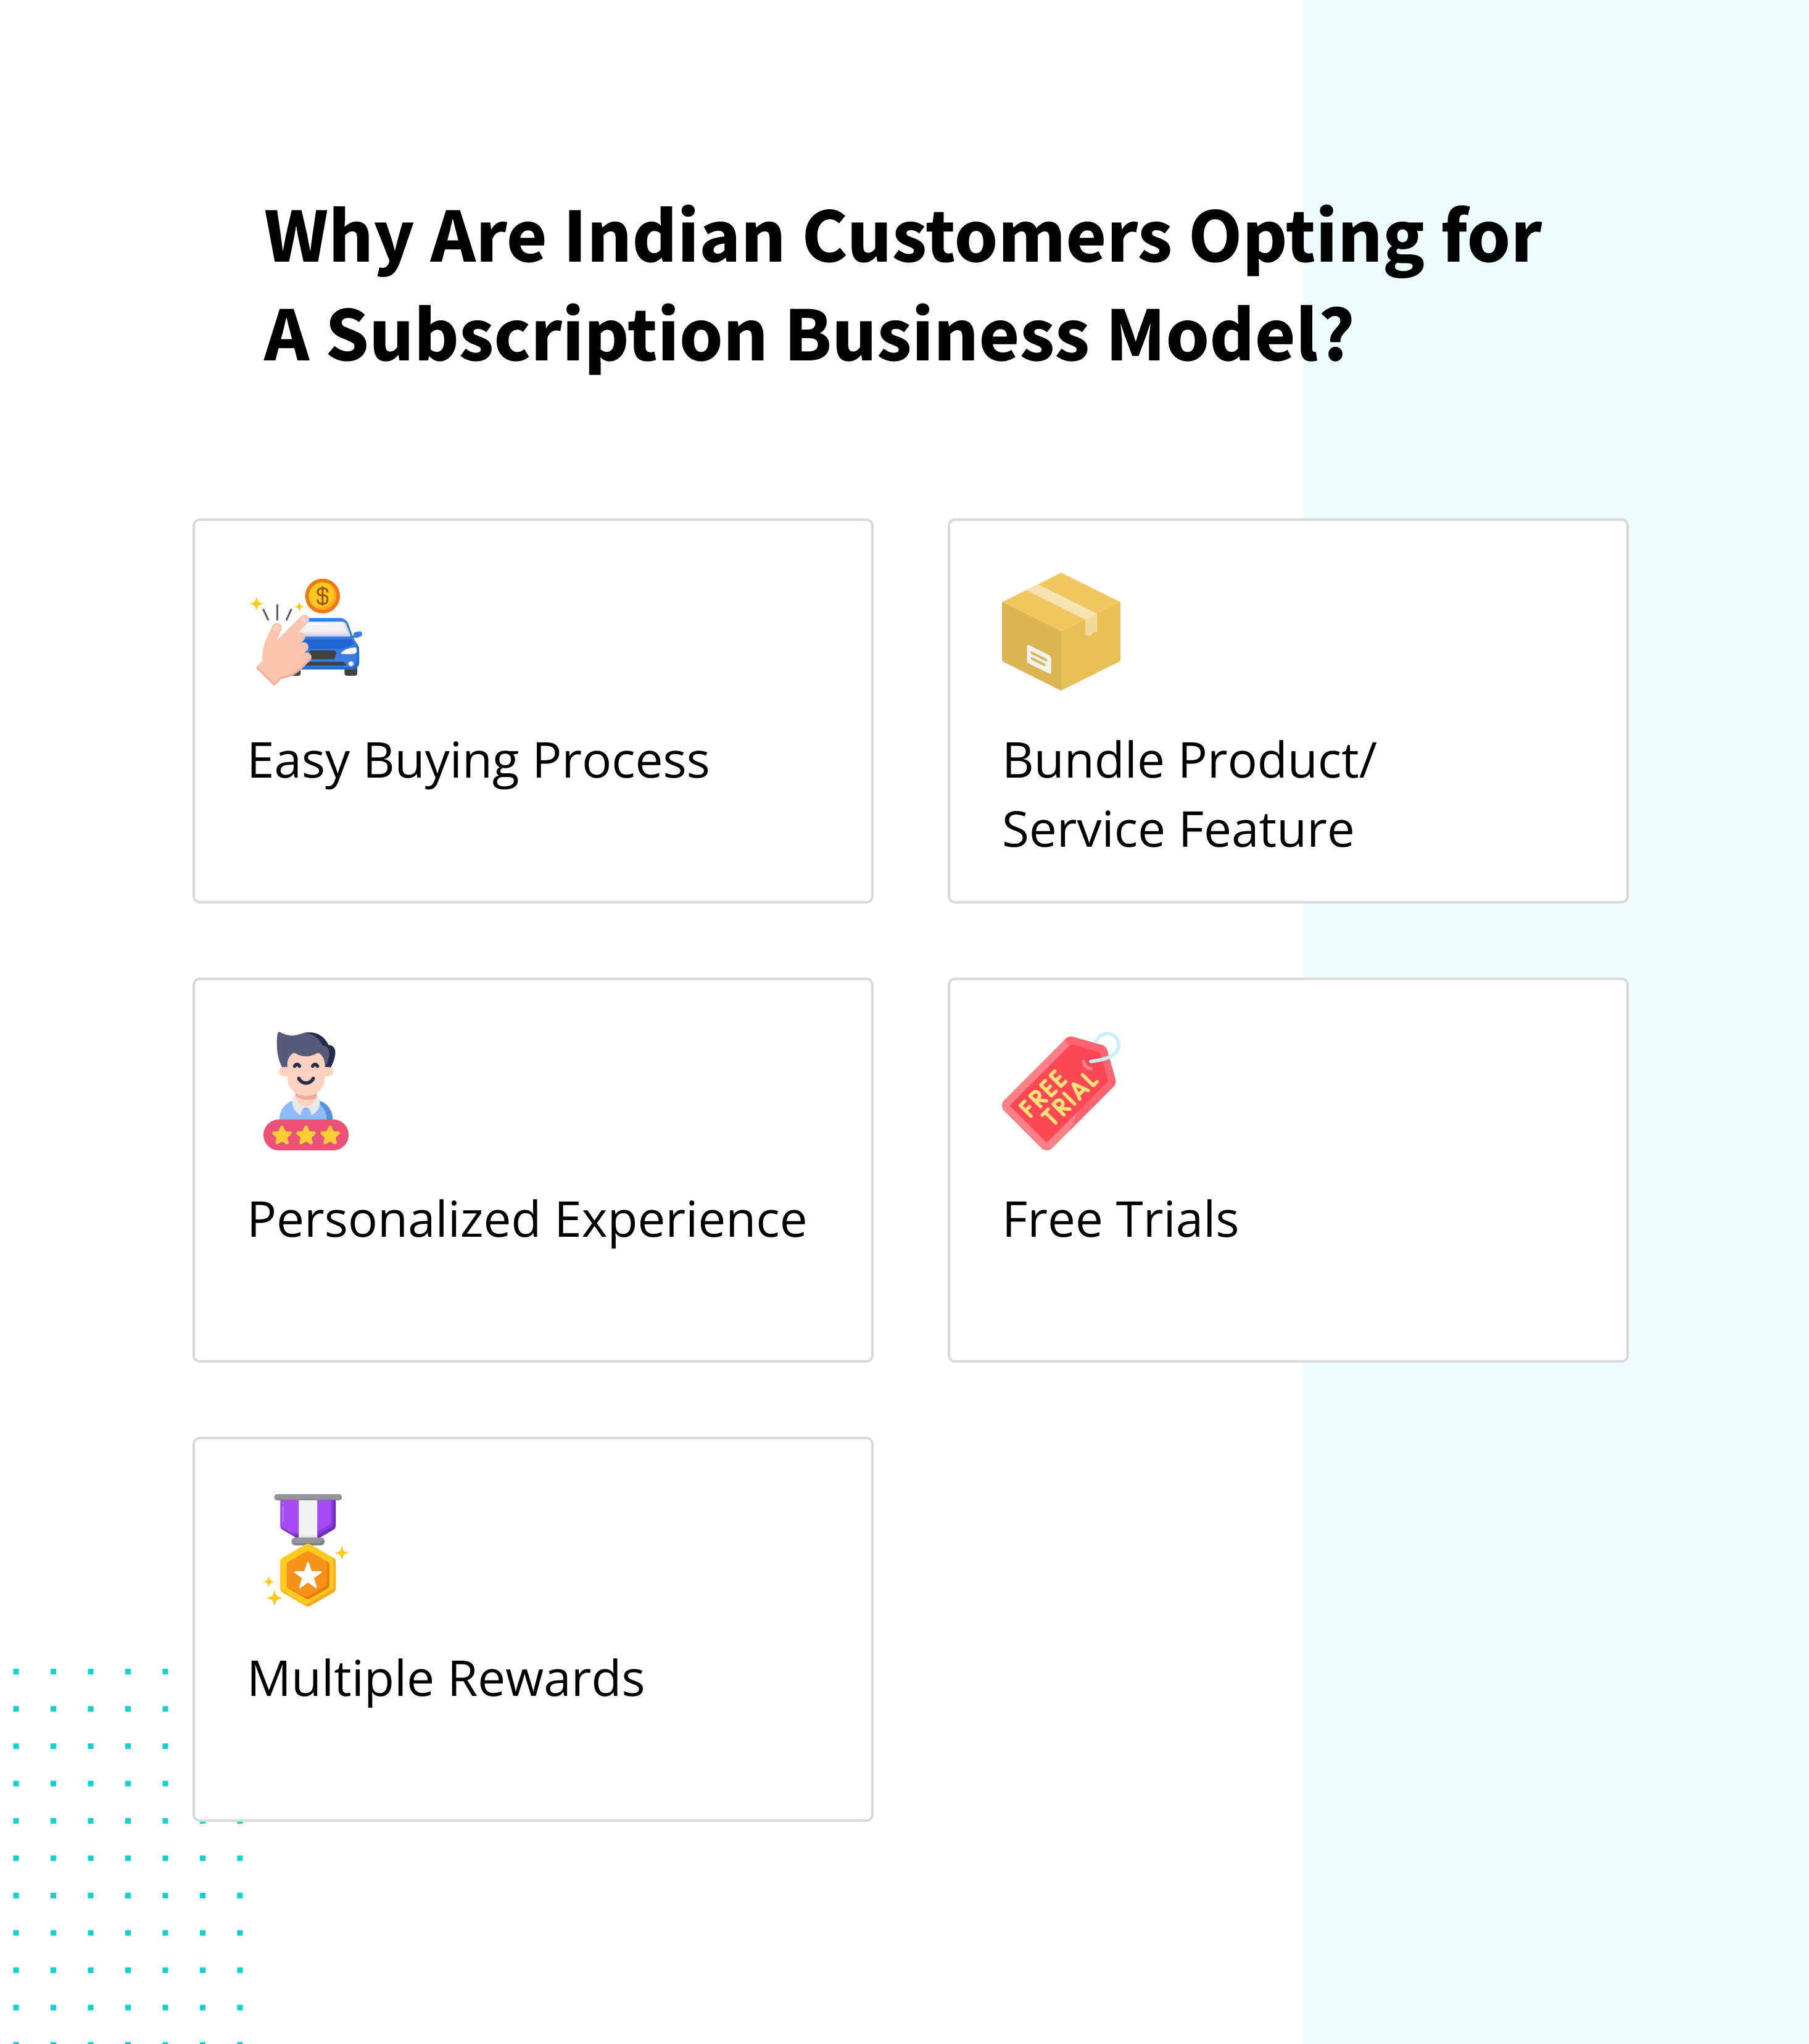 Why Are Indian Customers Opting for A Subscription Business Model?